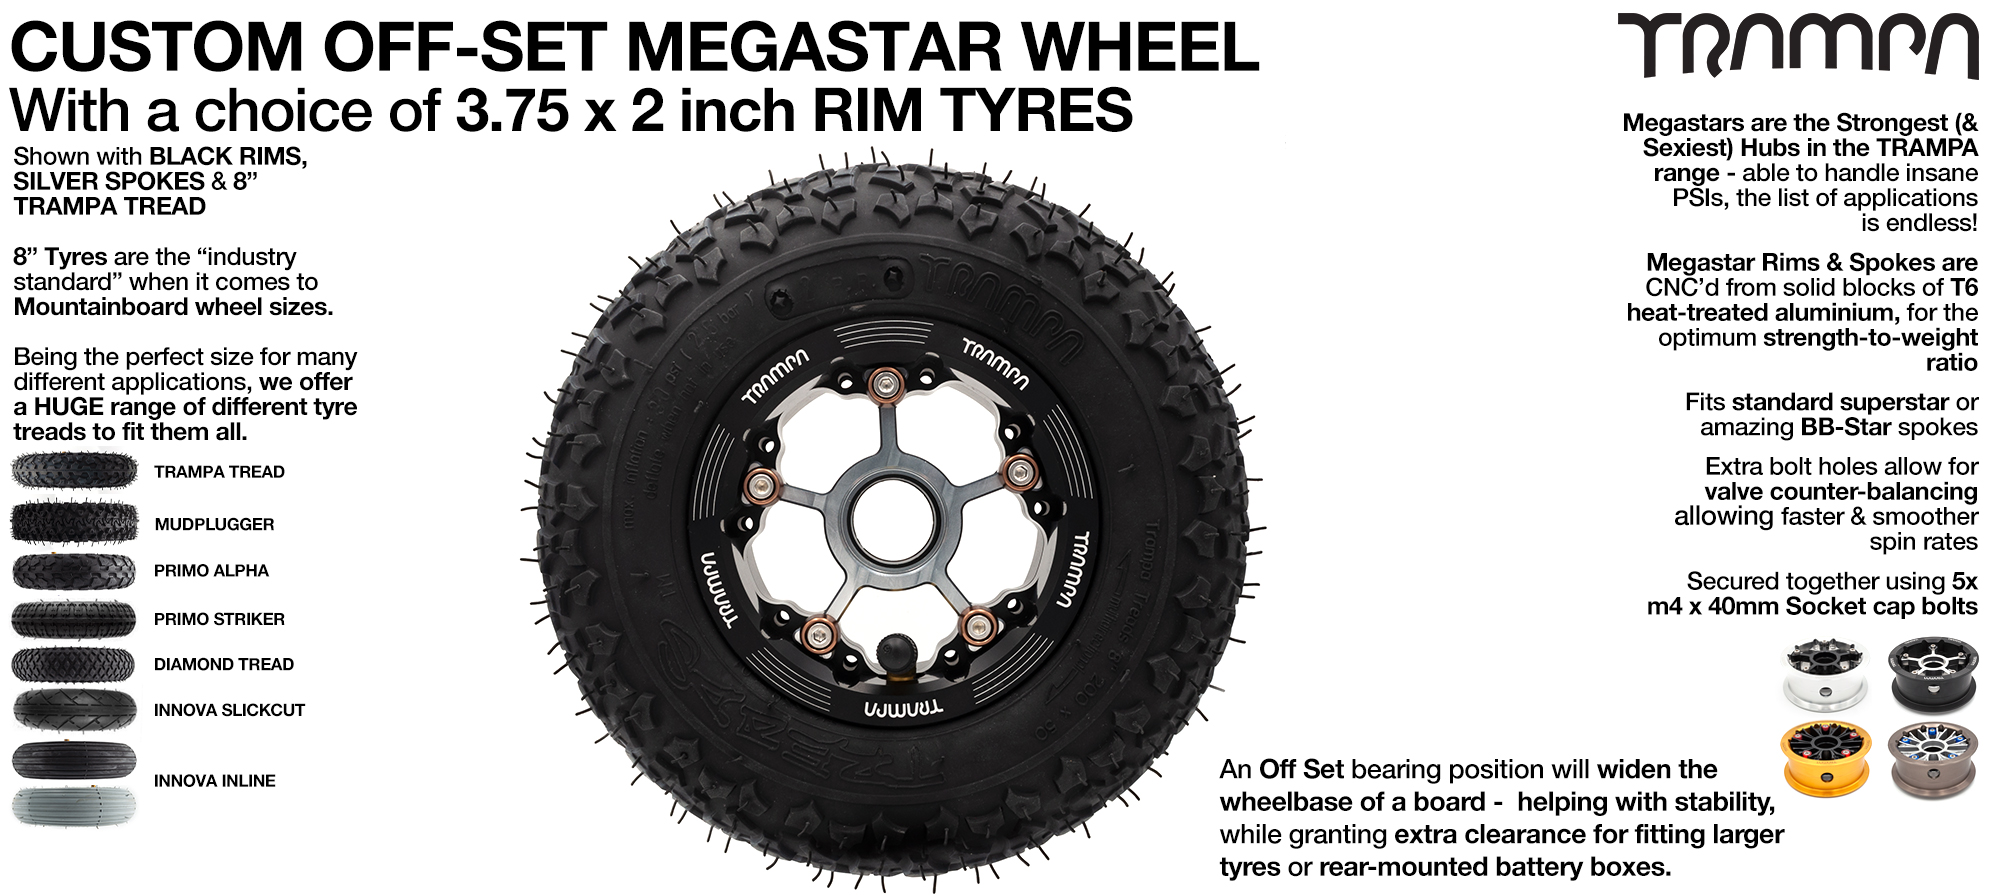 OFF-SET MEGASTAR 8 Wheel 3.75 x 2 Inch - Fits all TRAMPA Tyres up to 8 Inch 